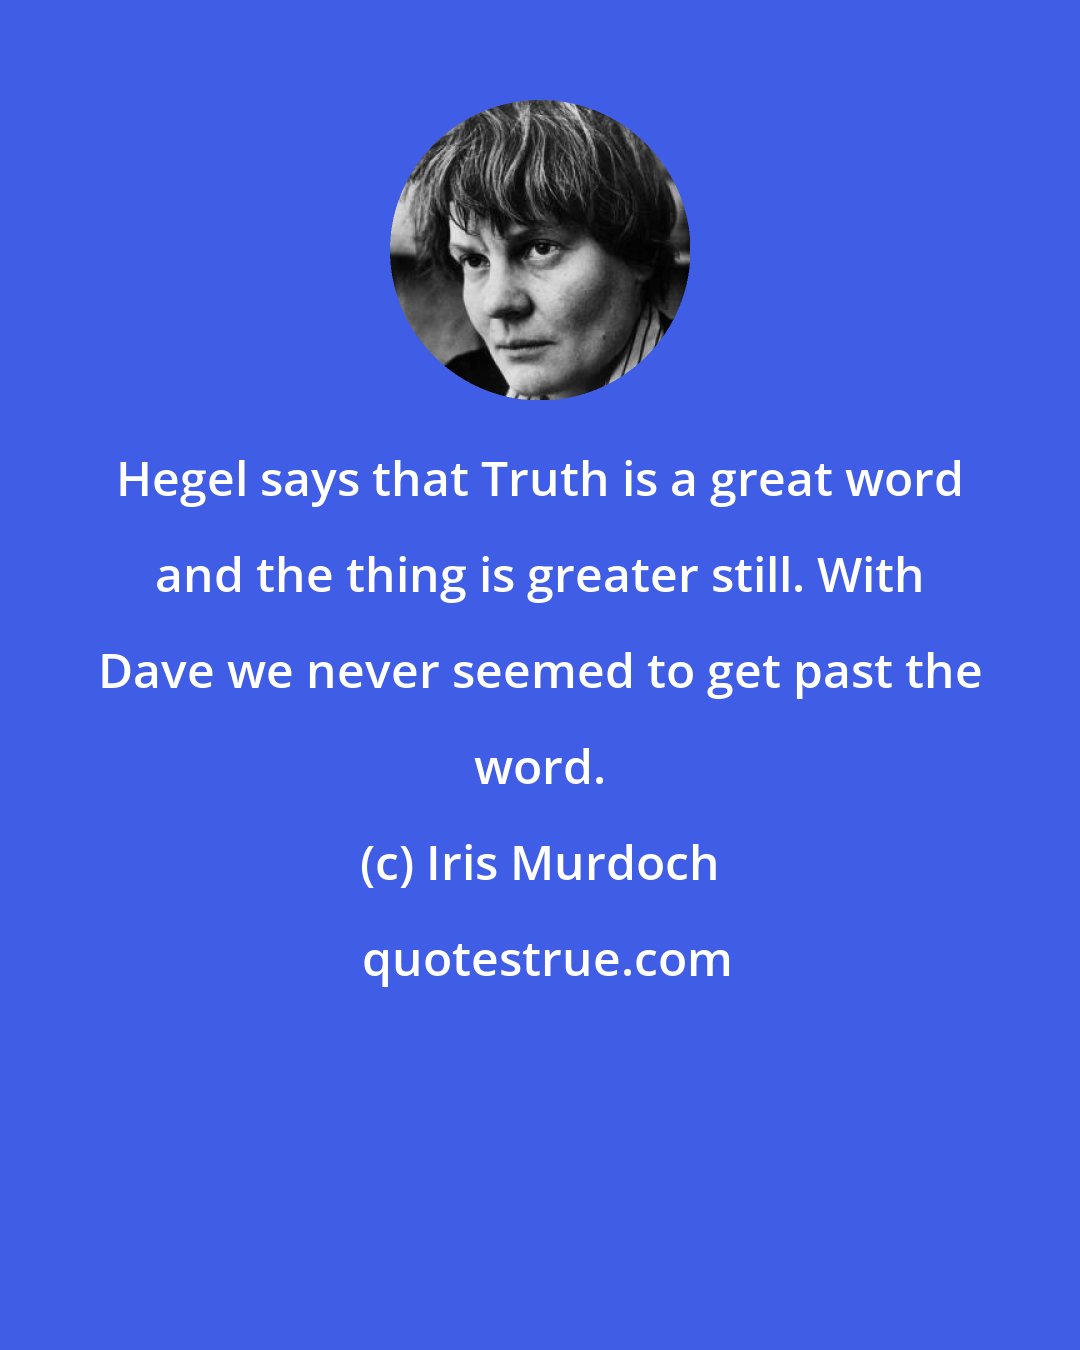 Iris Murdoch: Hegel says that Truth is a great word and the thing is greater still. With Dave we never seemed to get past the word.